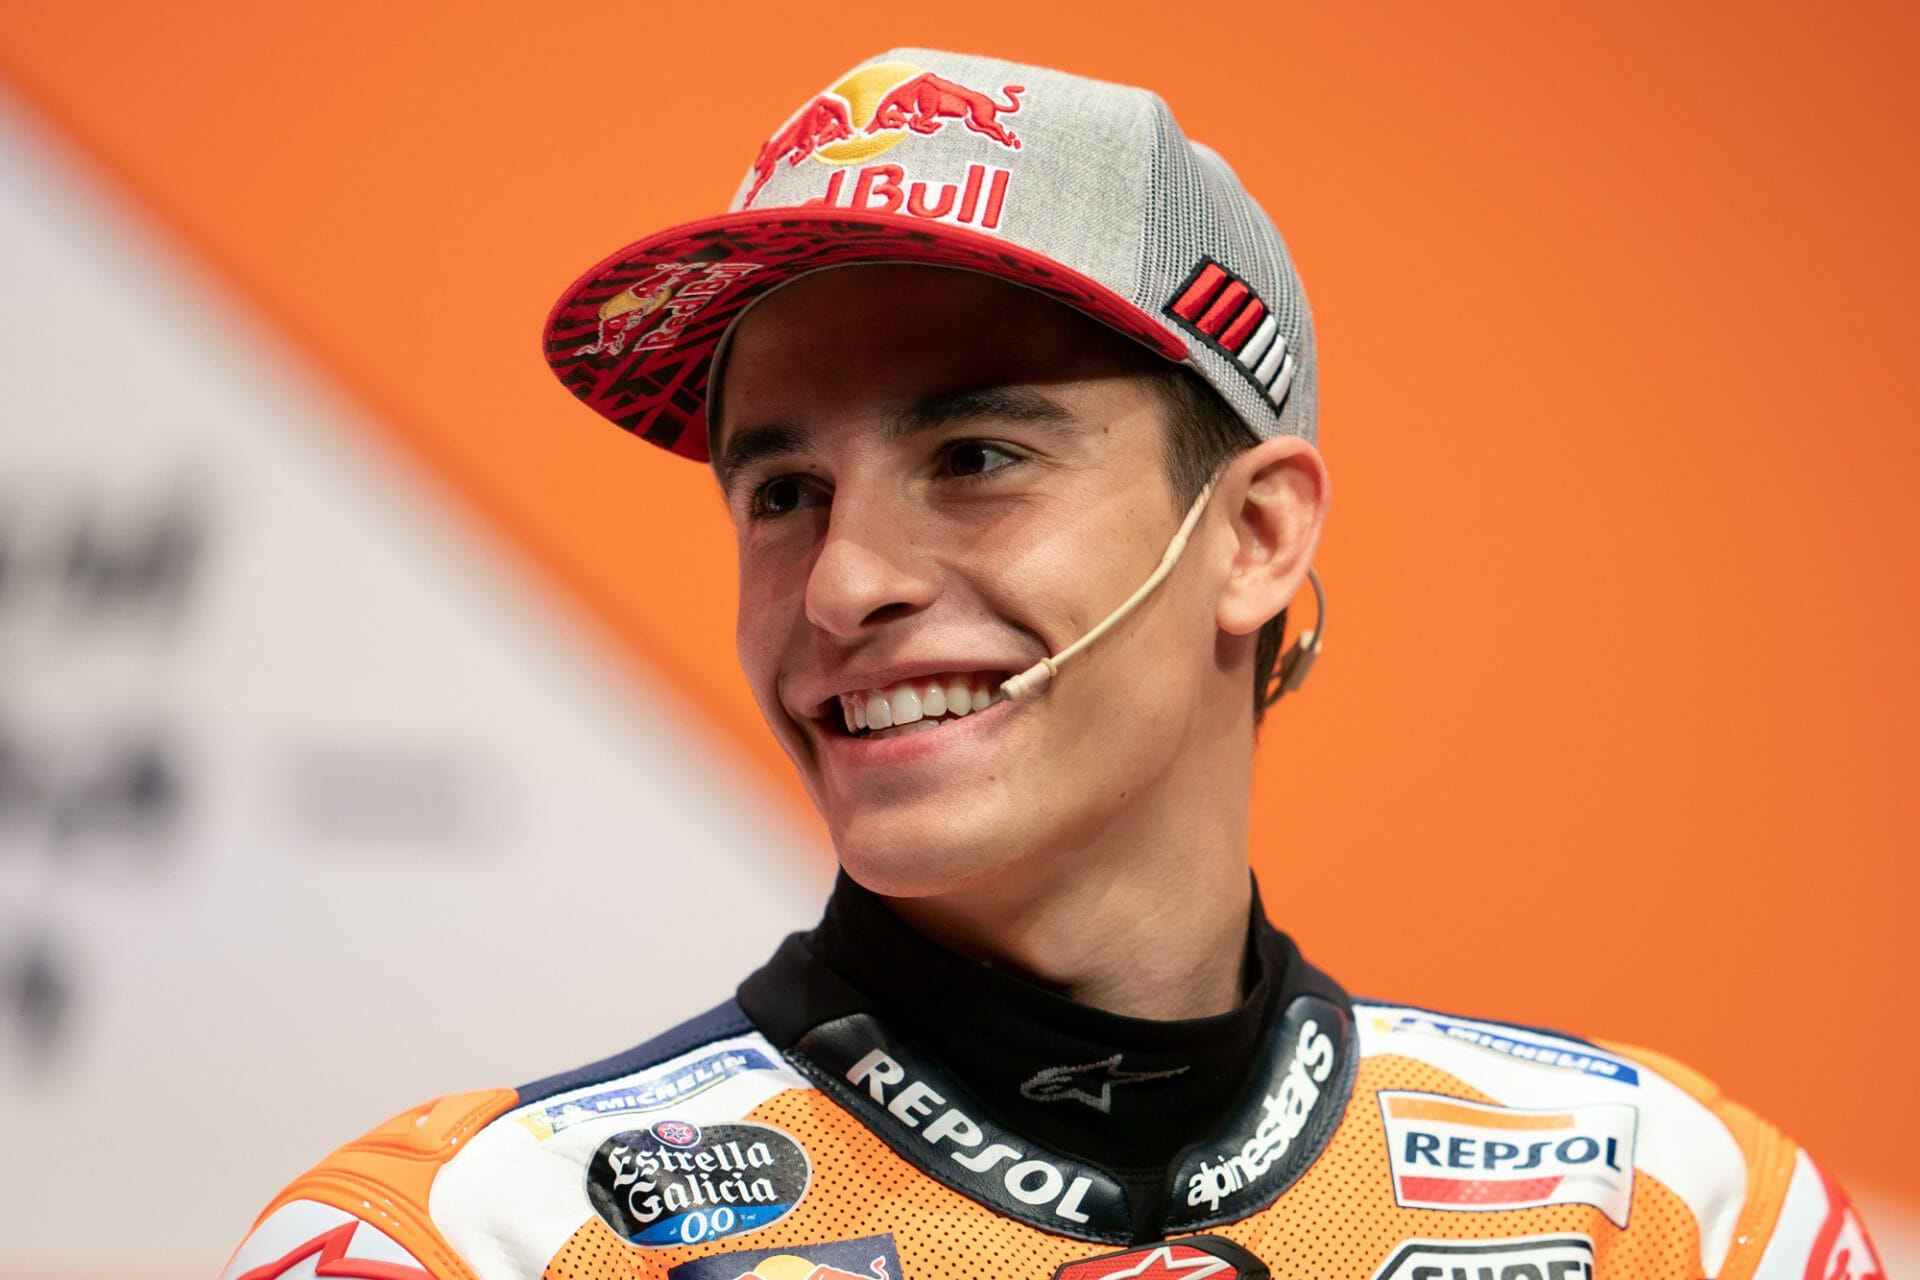 Marc Marquez gets OK for MotoGP test
- also in the MOTORCYCLES.NEWS